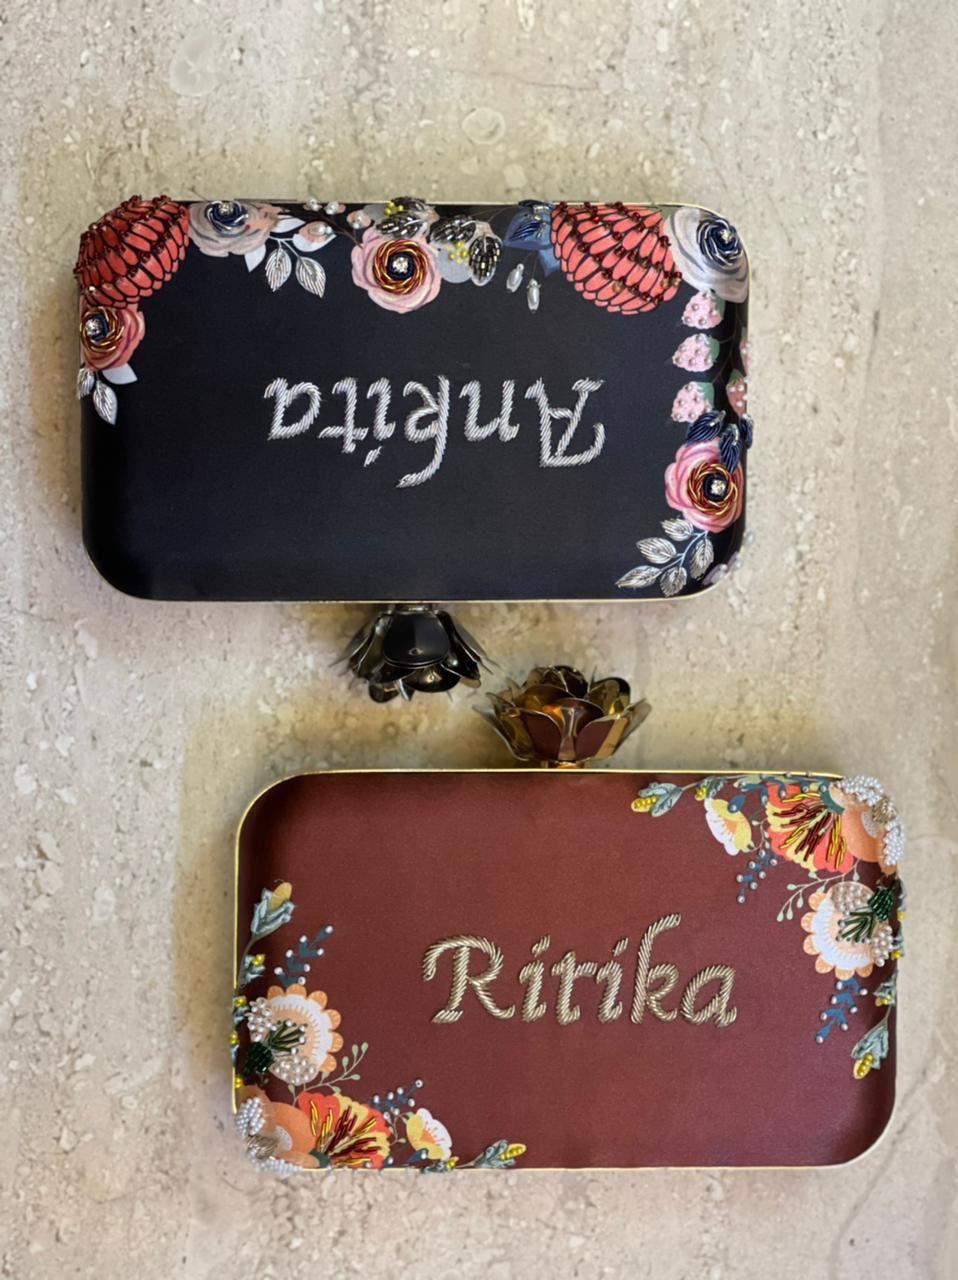 Buy ASHVAH Unicorn Ritika Name Ceramic Coffee Mug and Coaster Combo Gift  (Pack of 2) for Daughter, Sister, Wife, Name -Ritika Online at Low Prices  in India - Amazon.in